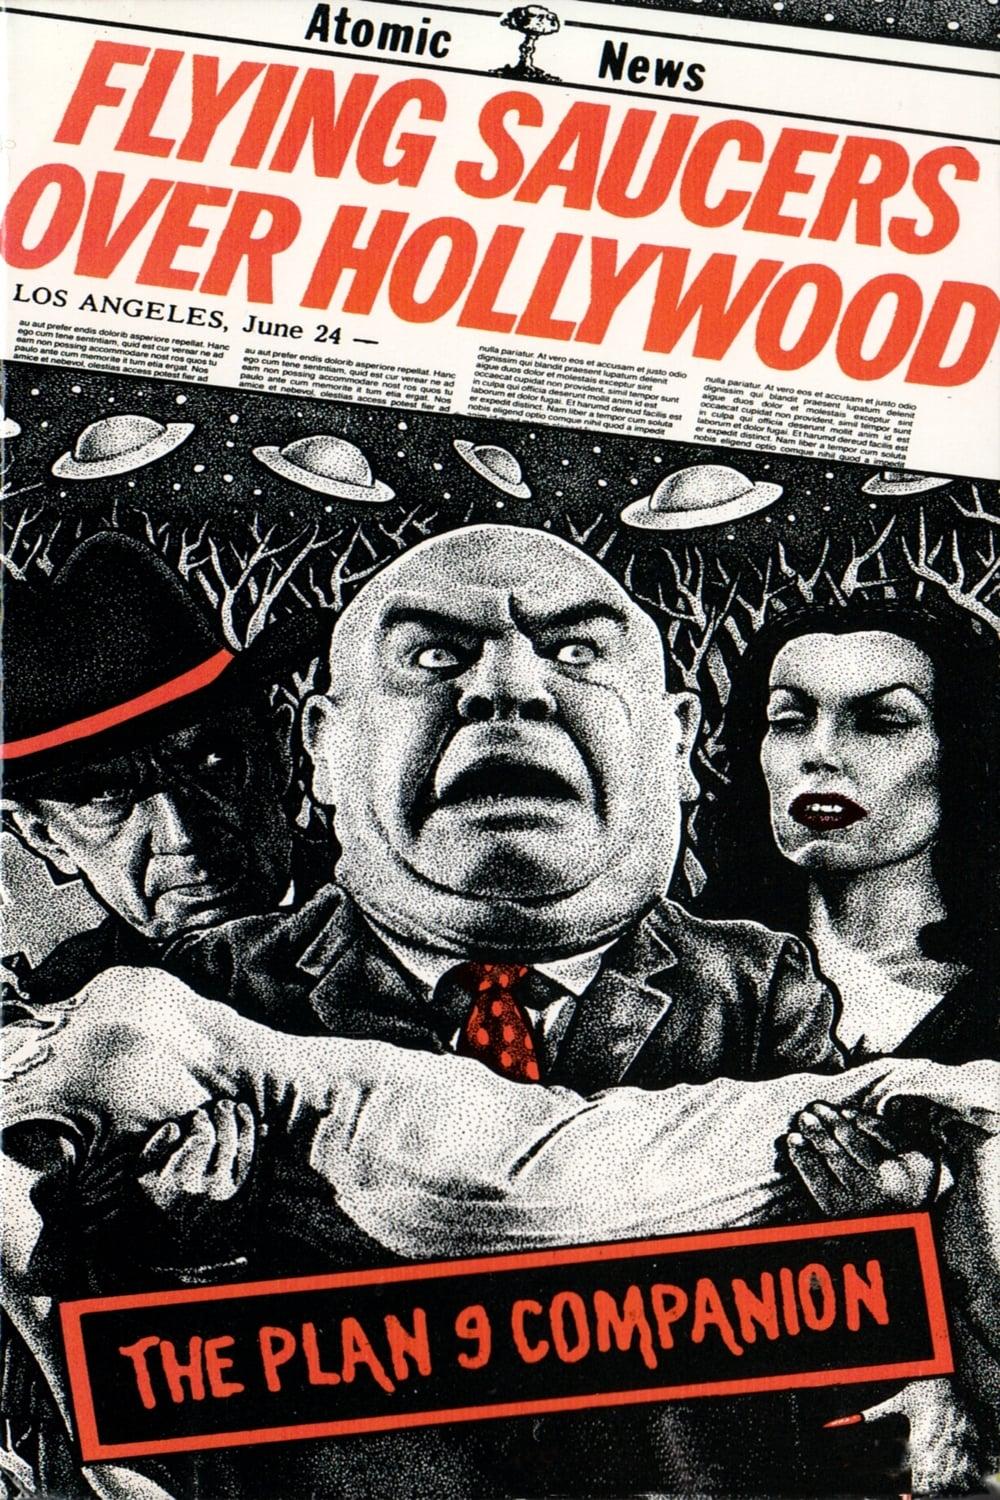 Flying Saucers Over Hollywood: The 'Plan 9' Companion poster